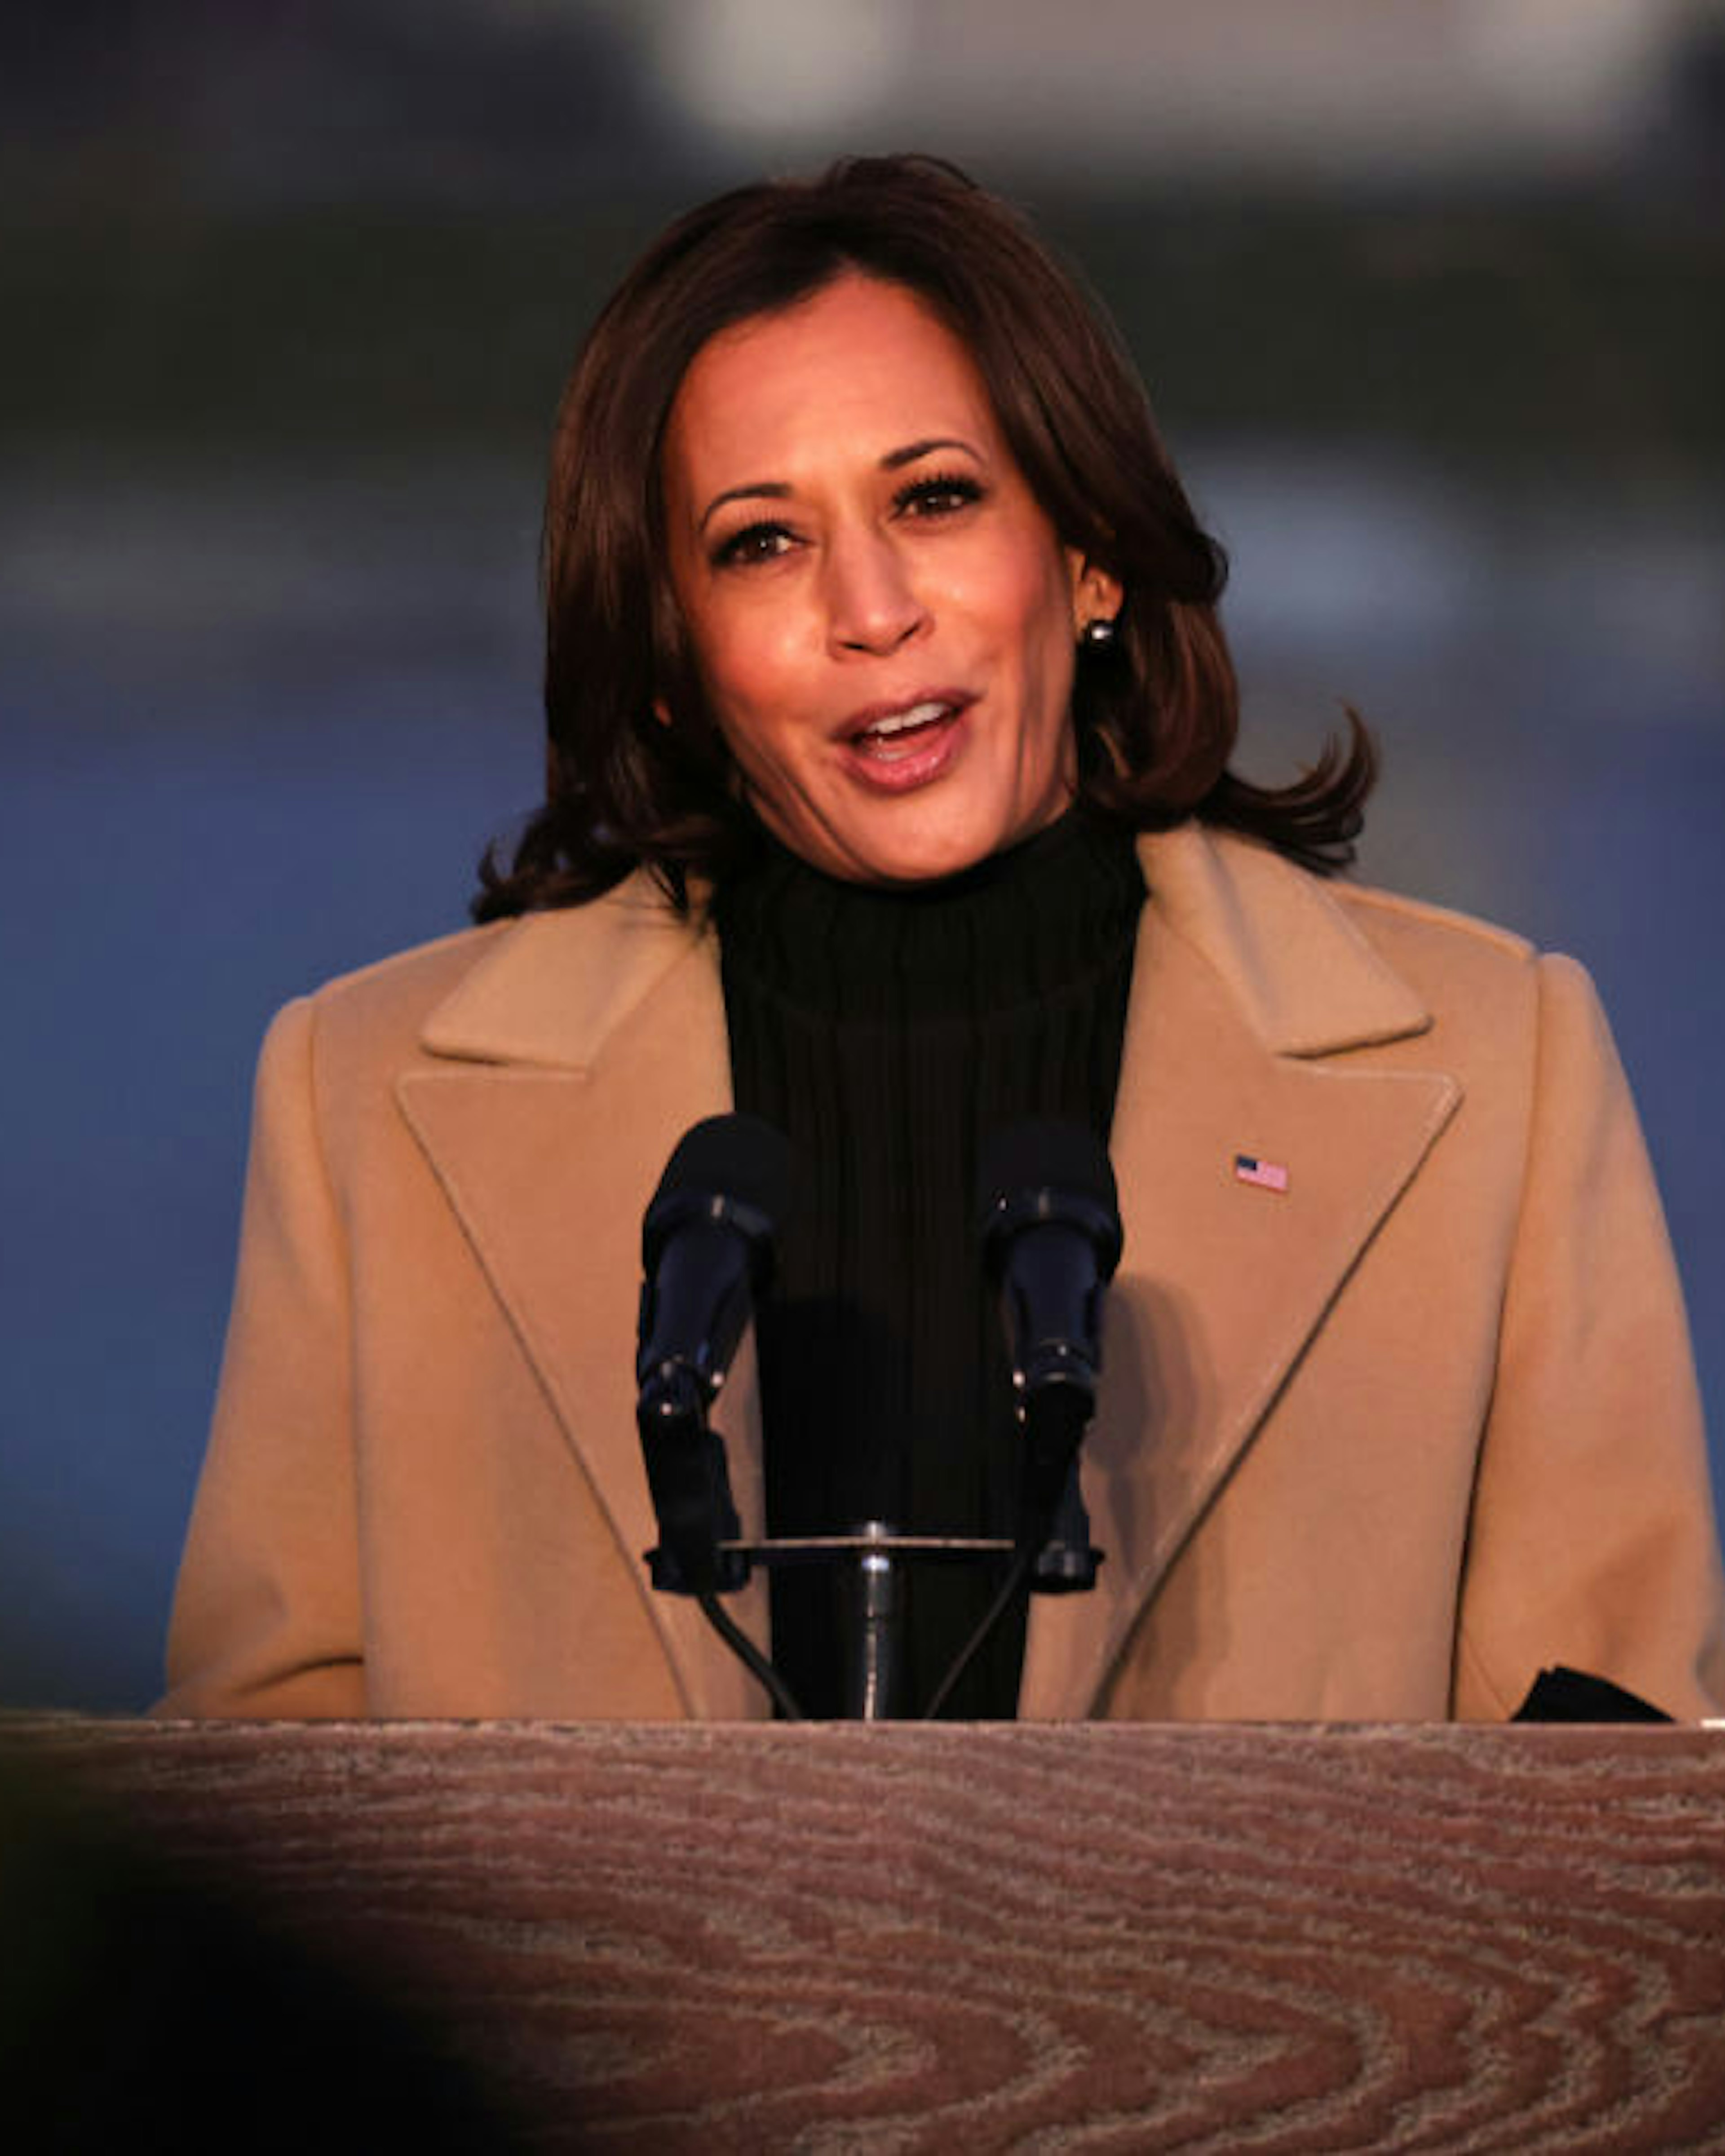 WASHINGTON, DC - JANUARY 19: Vice President-elect Kamala Harris speaks at a memorial for victims of the coronavirus (COVID-19) pandemic at the Lincoln Memorial on the eve of the presidential inauguration on January 19, 2021 in Washington, DC. There have been nearly 400,00 deaths in the U.S. since the first confirmed case of the virus in Seattle in January of 2020. (Photo by Michael M. Santiago/Getty Images)